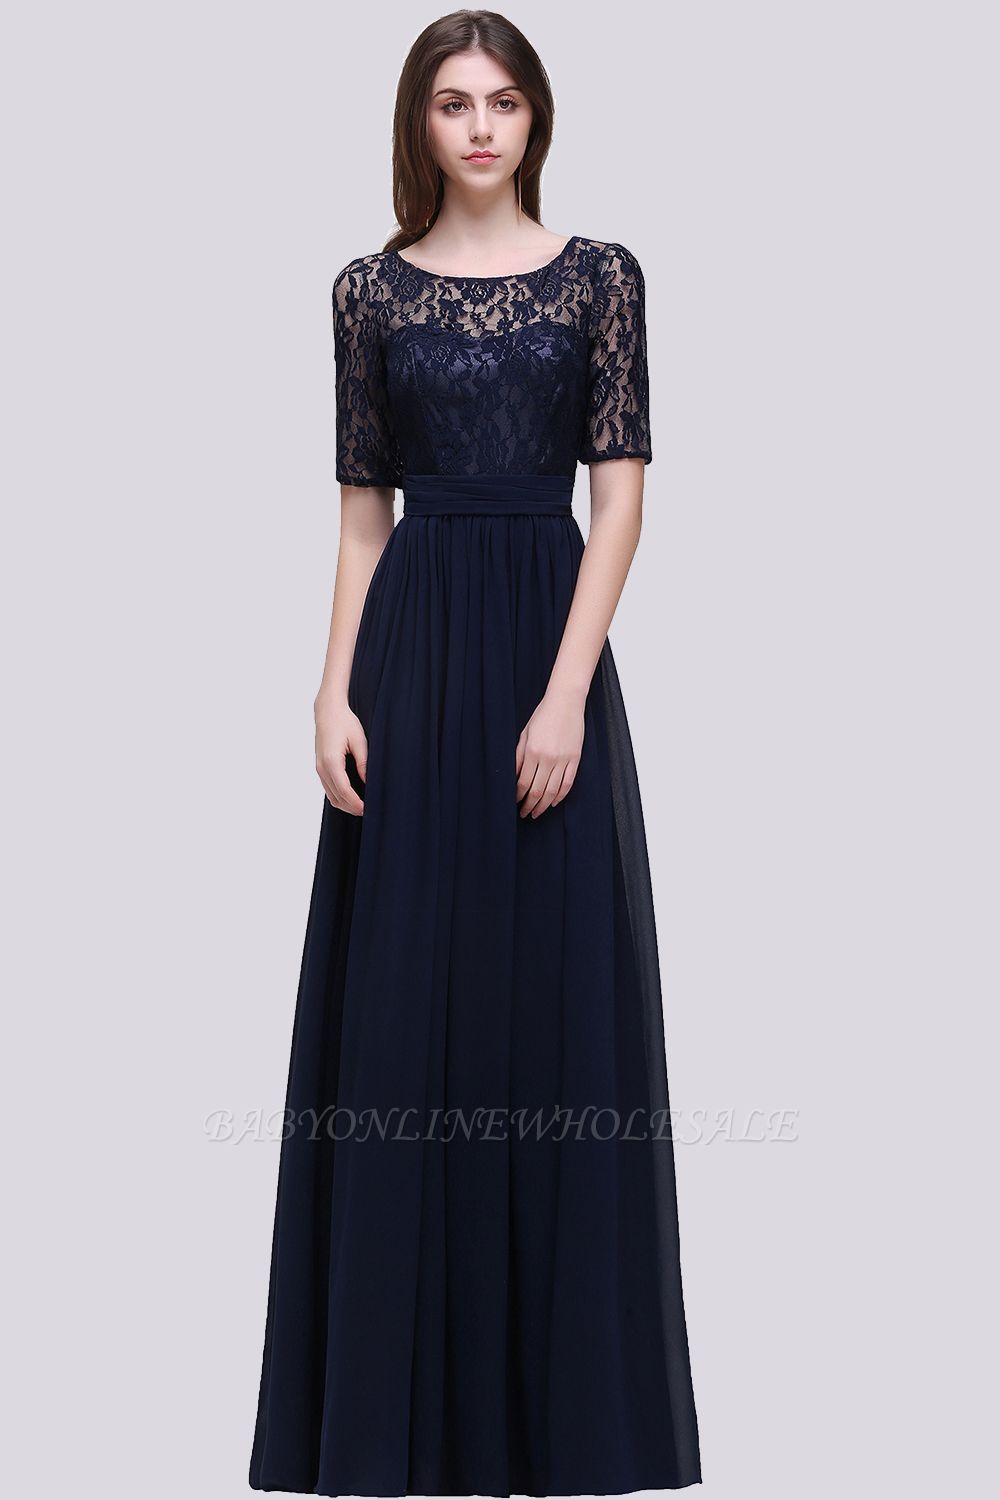 Custom Made A-line Chiffon Lace Scoop Half-Sleeve Floor-Length Bridesmaid Dress with Round back